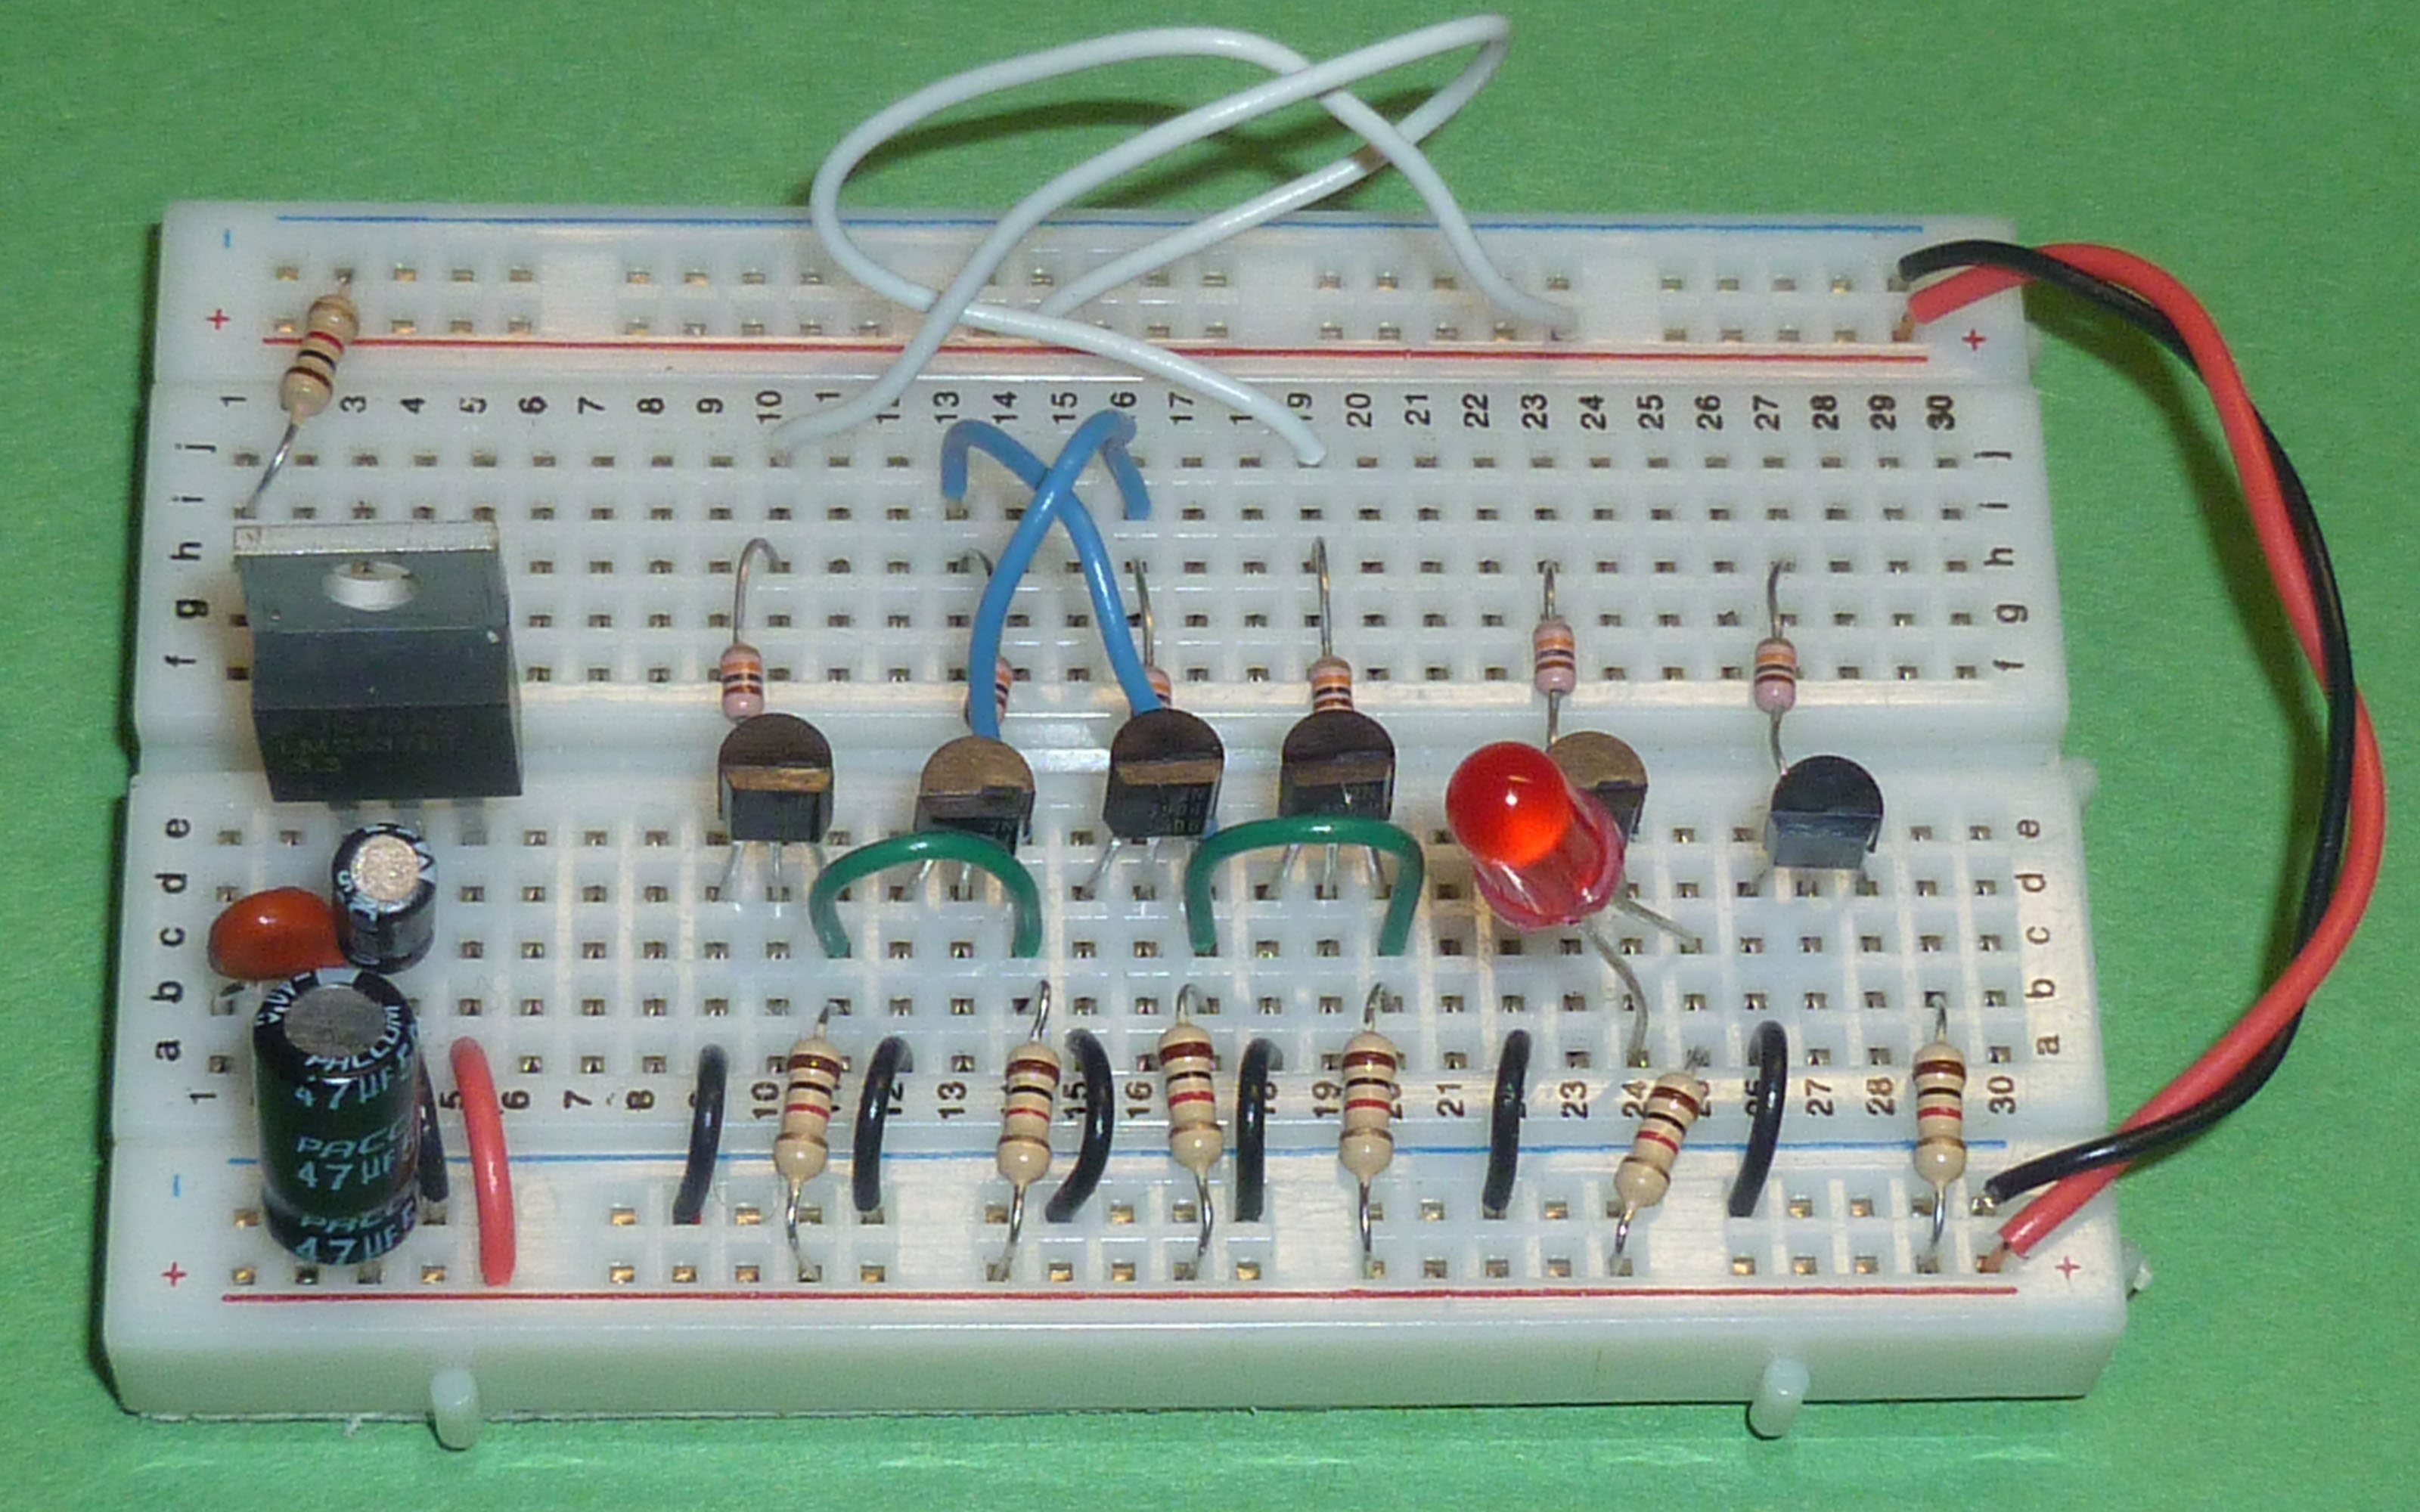 breadboard with LSI chip